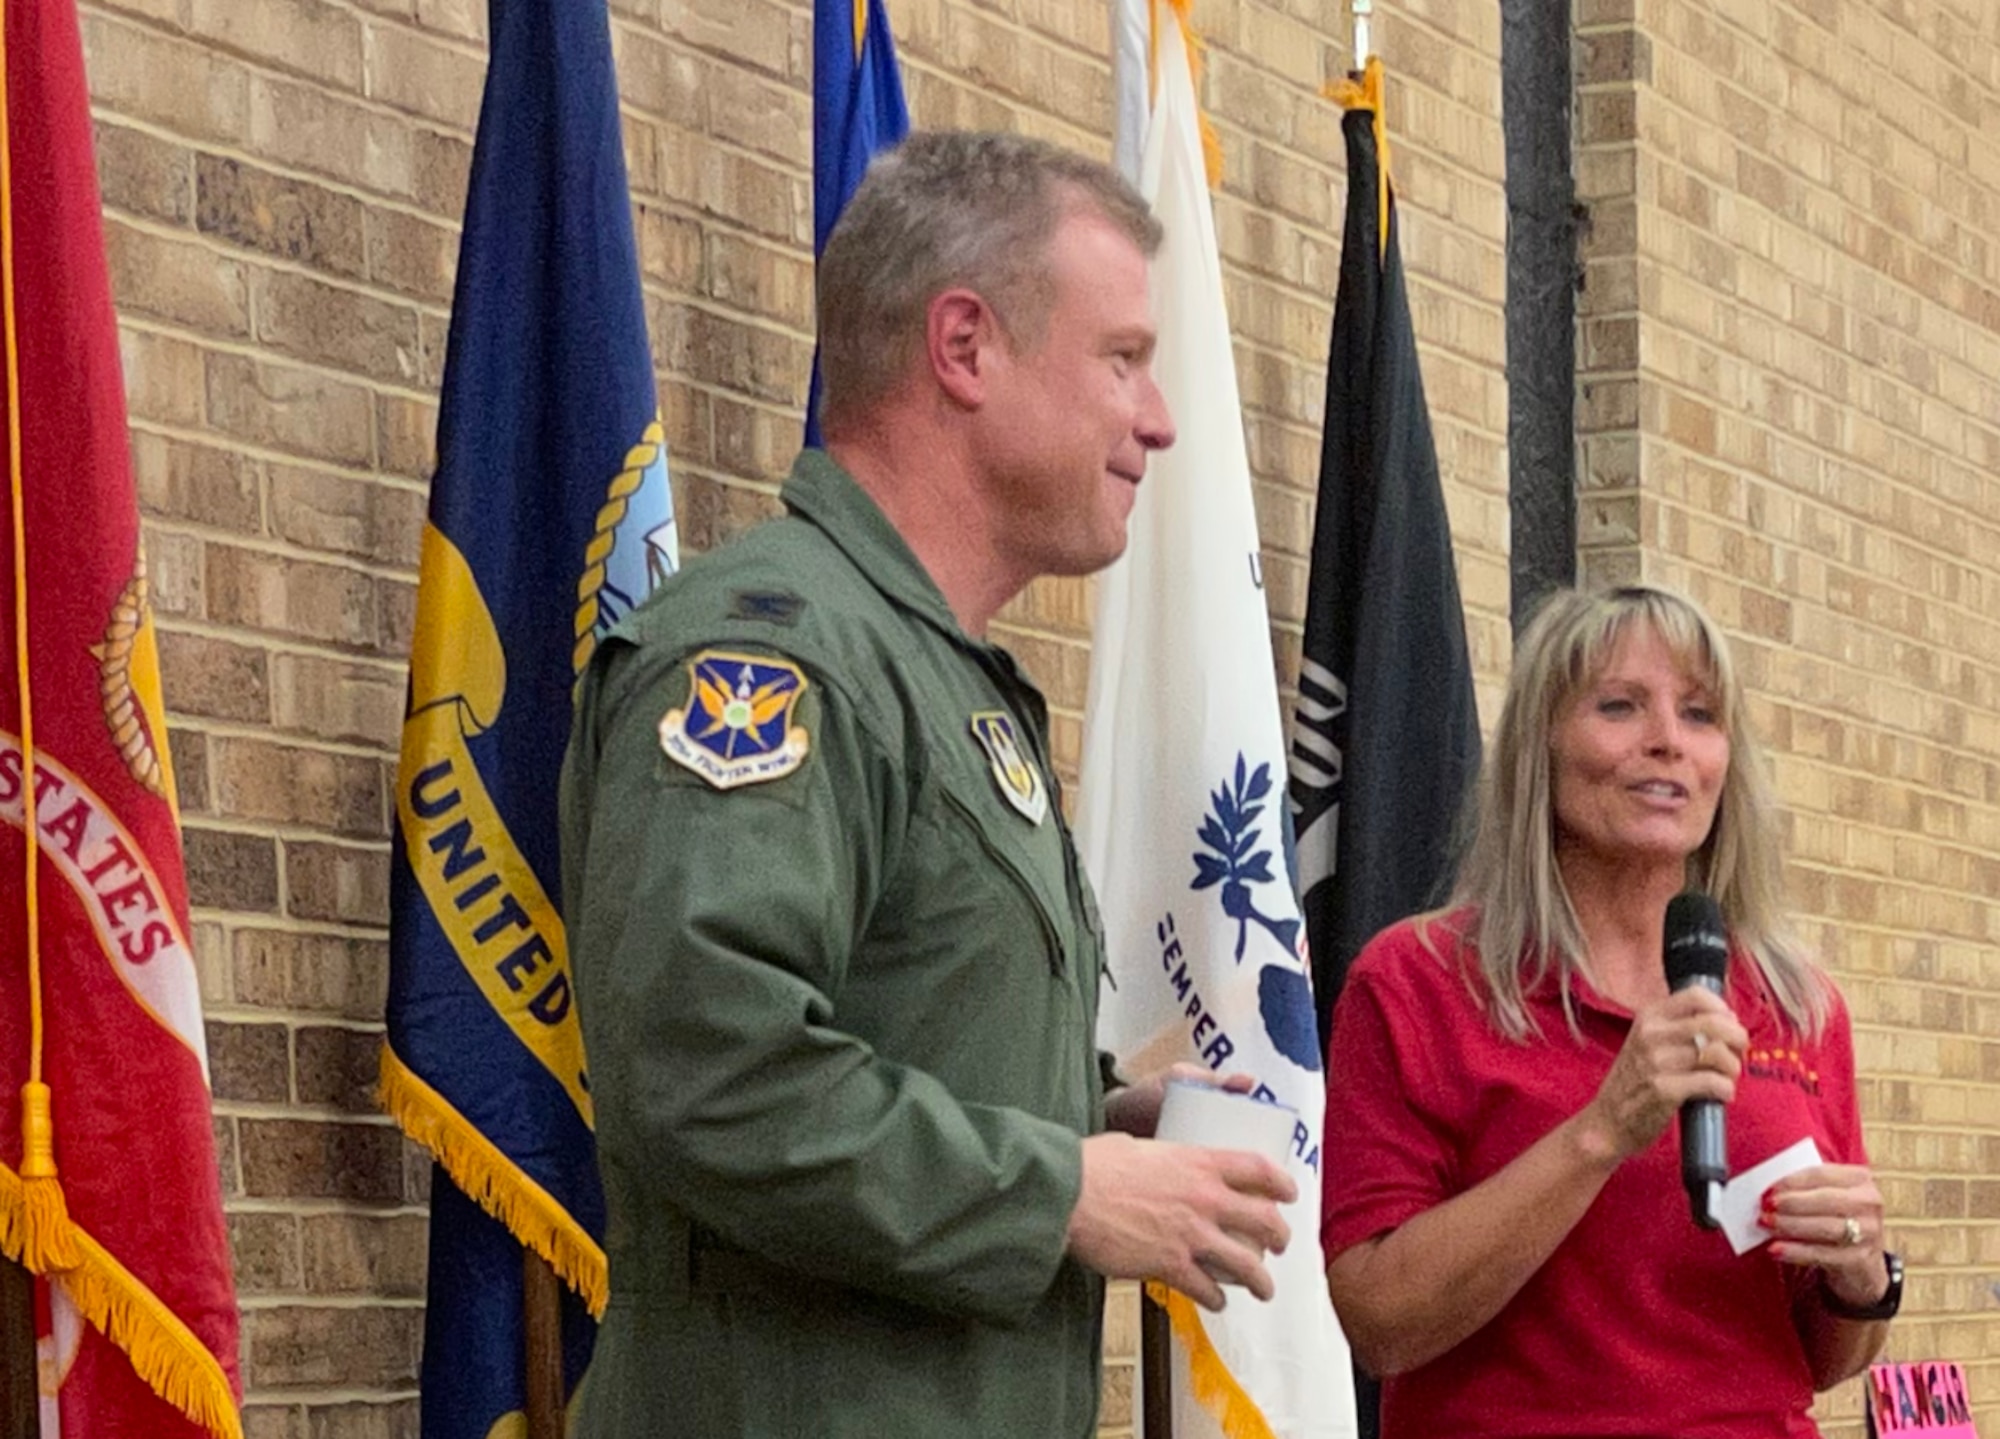 (left) 301st Fighter Wing Commander Col. Allen Duckworth receives a Roll Call coffee mug from Roll Call volunteer, Senior Master Sgt. (ret.) and former 301 FW member Mary Staffeld after speaking at Roll Call Fort Worth's monthly luncheon event held on August 27, 2021 in Fort Worth, Texas. Roll Call's mission is "to honor and serve their local veterans by providing a regular venue for fellowship and camaraderie, providing outreach and home visitation services, and sharing the stories of their local veterans through community engagements and publication." (U.S. Air Force photos by Capt. Jessica Gross) 
*No Federal Endorsement Implied*